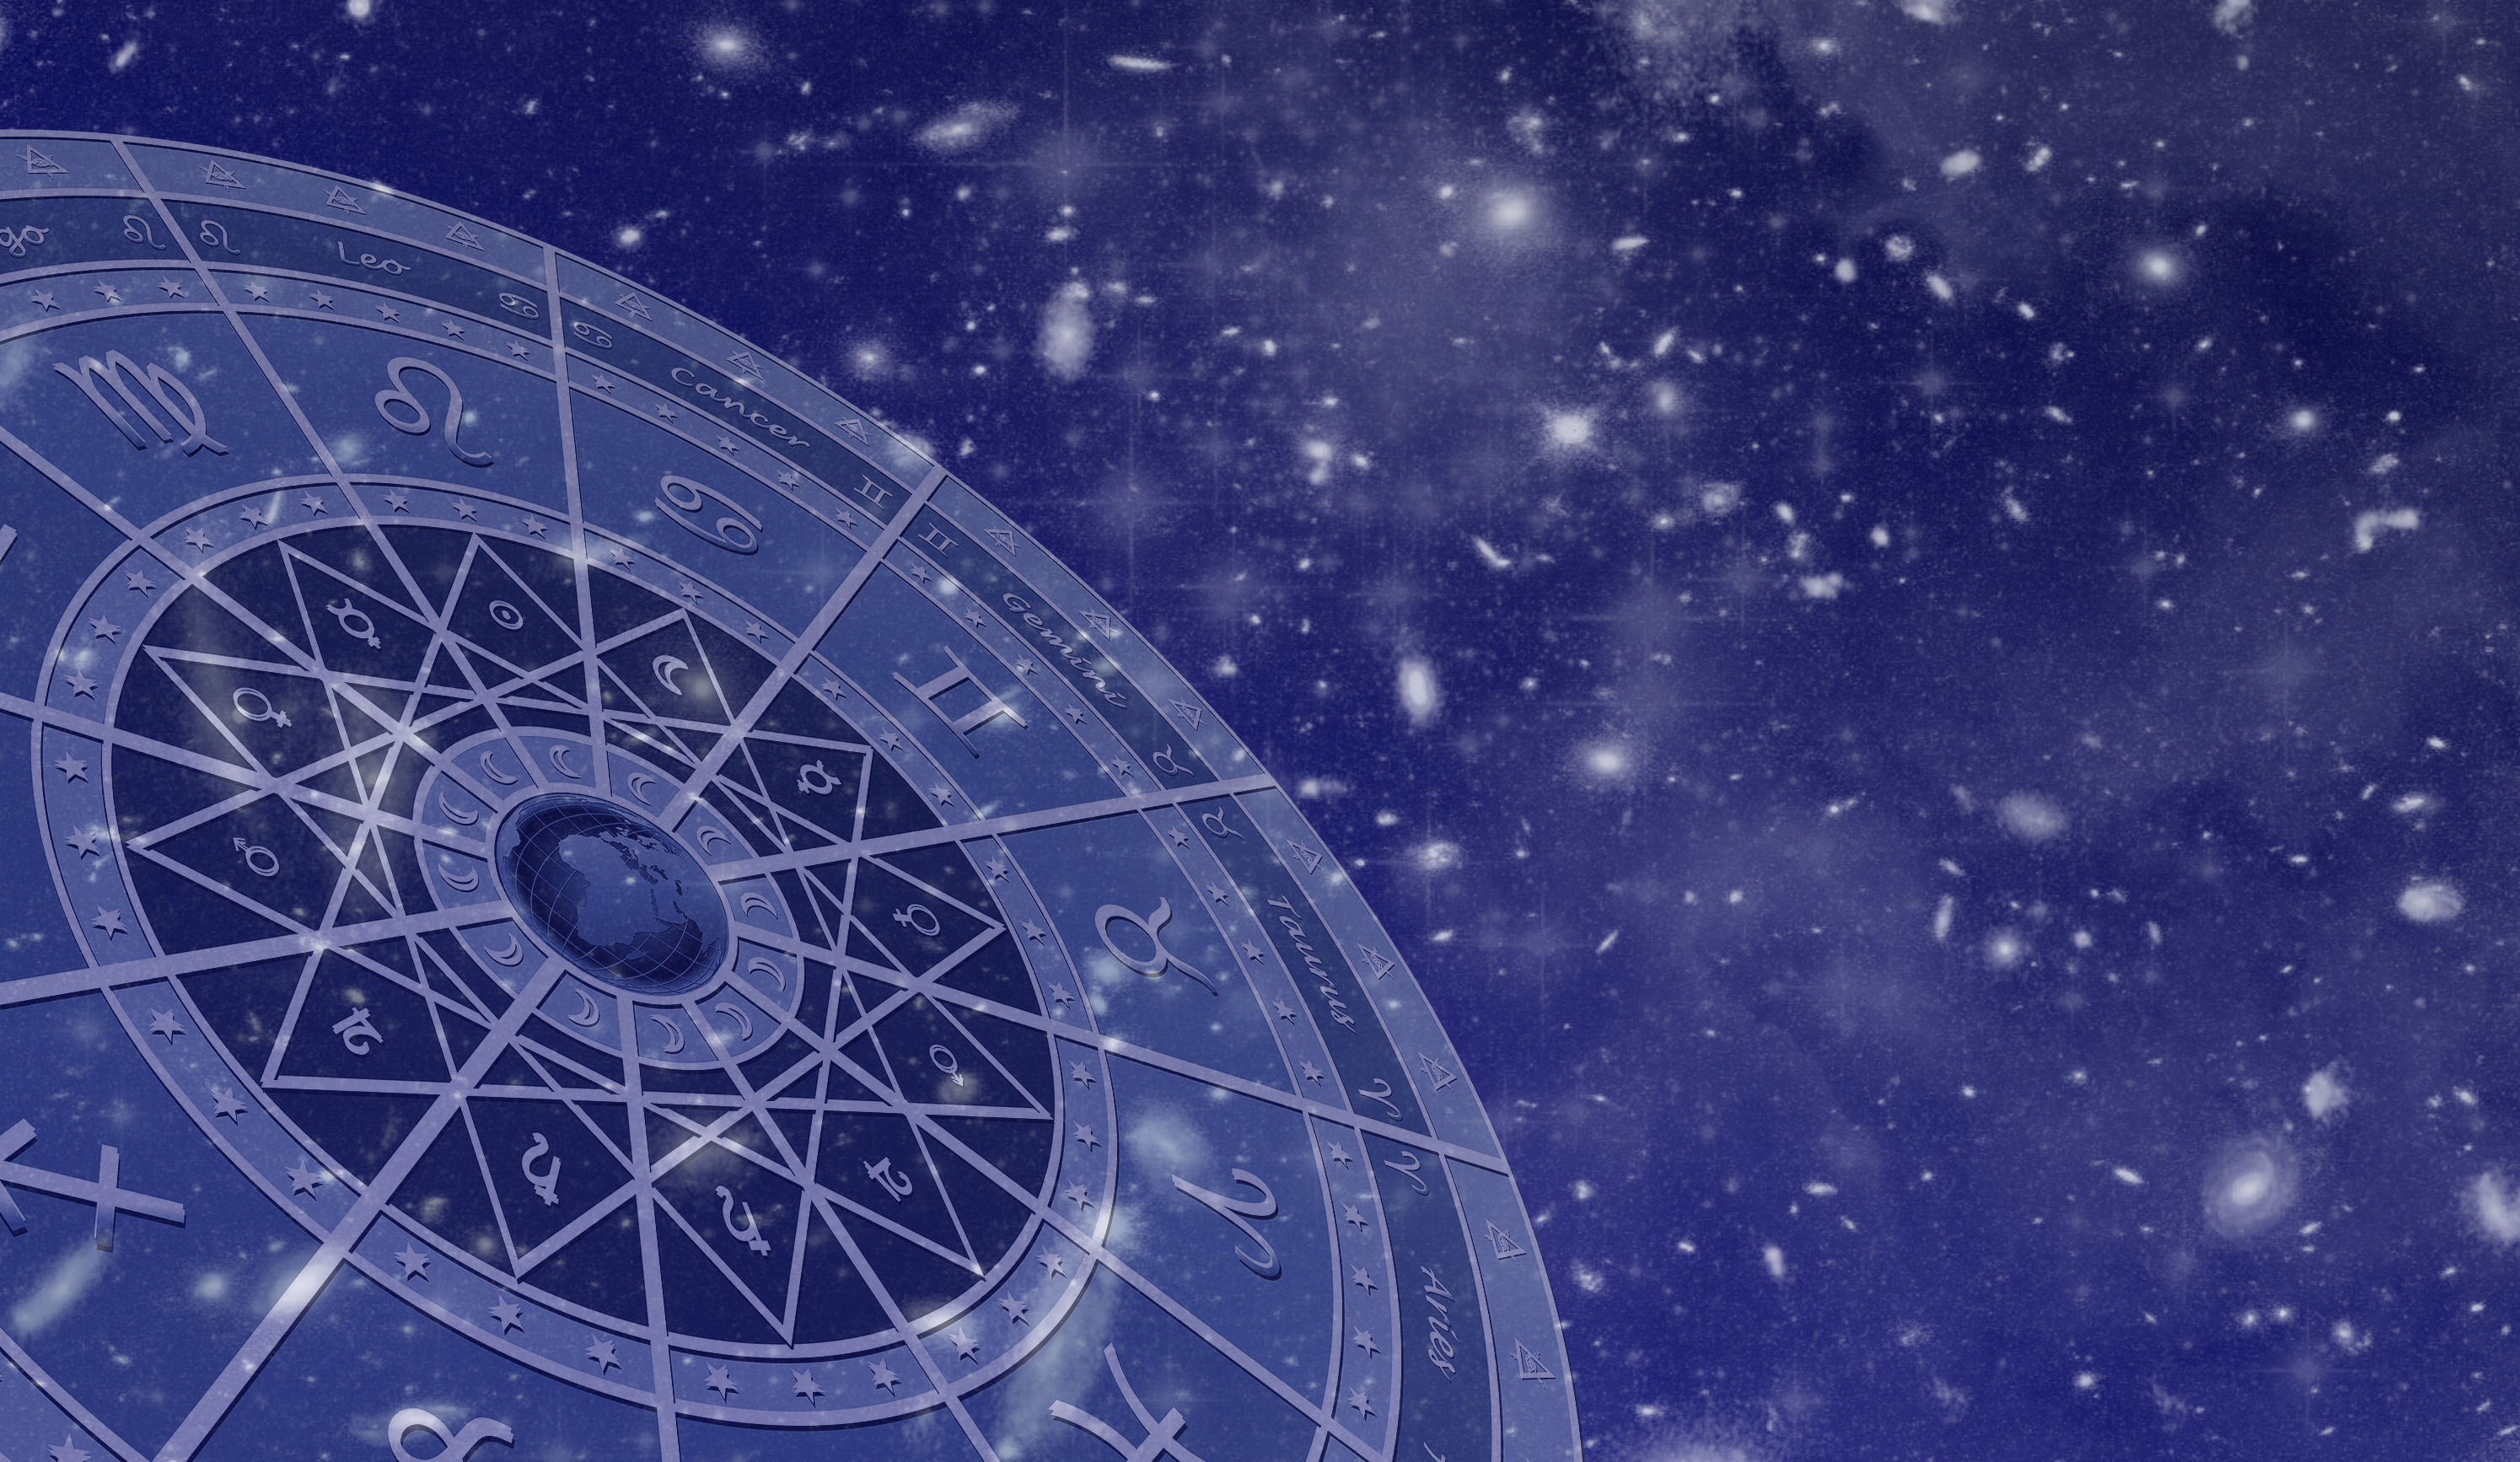 Signs of the zodiac on a blue background wallpapers and images